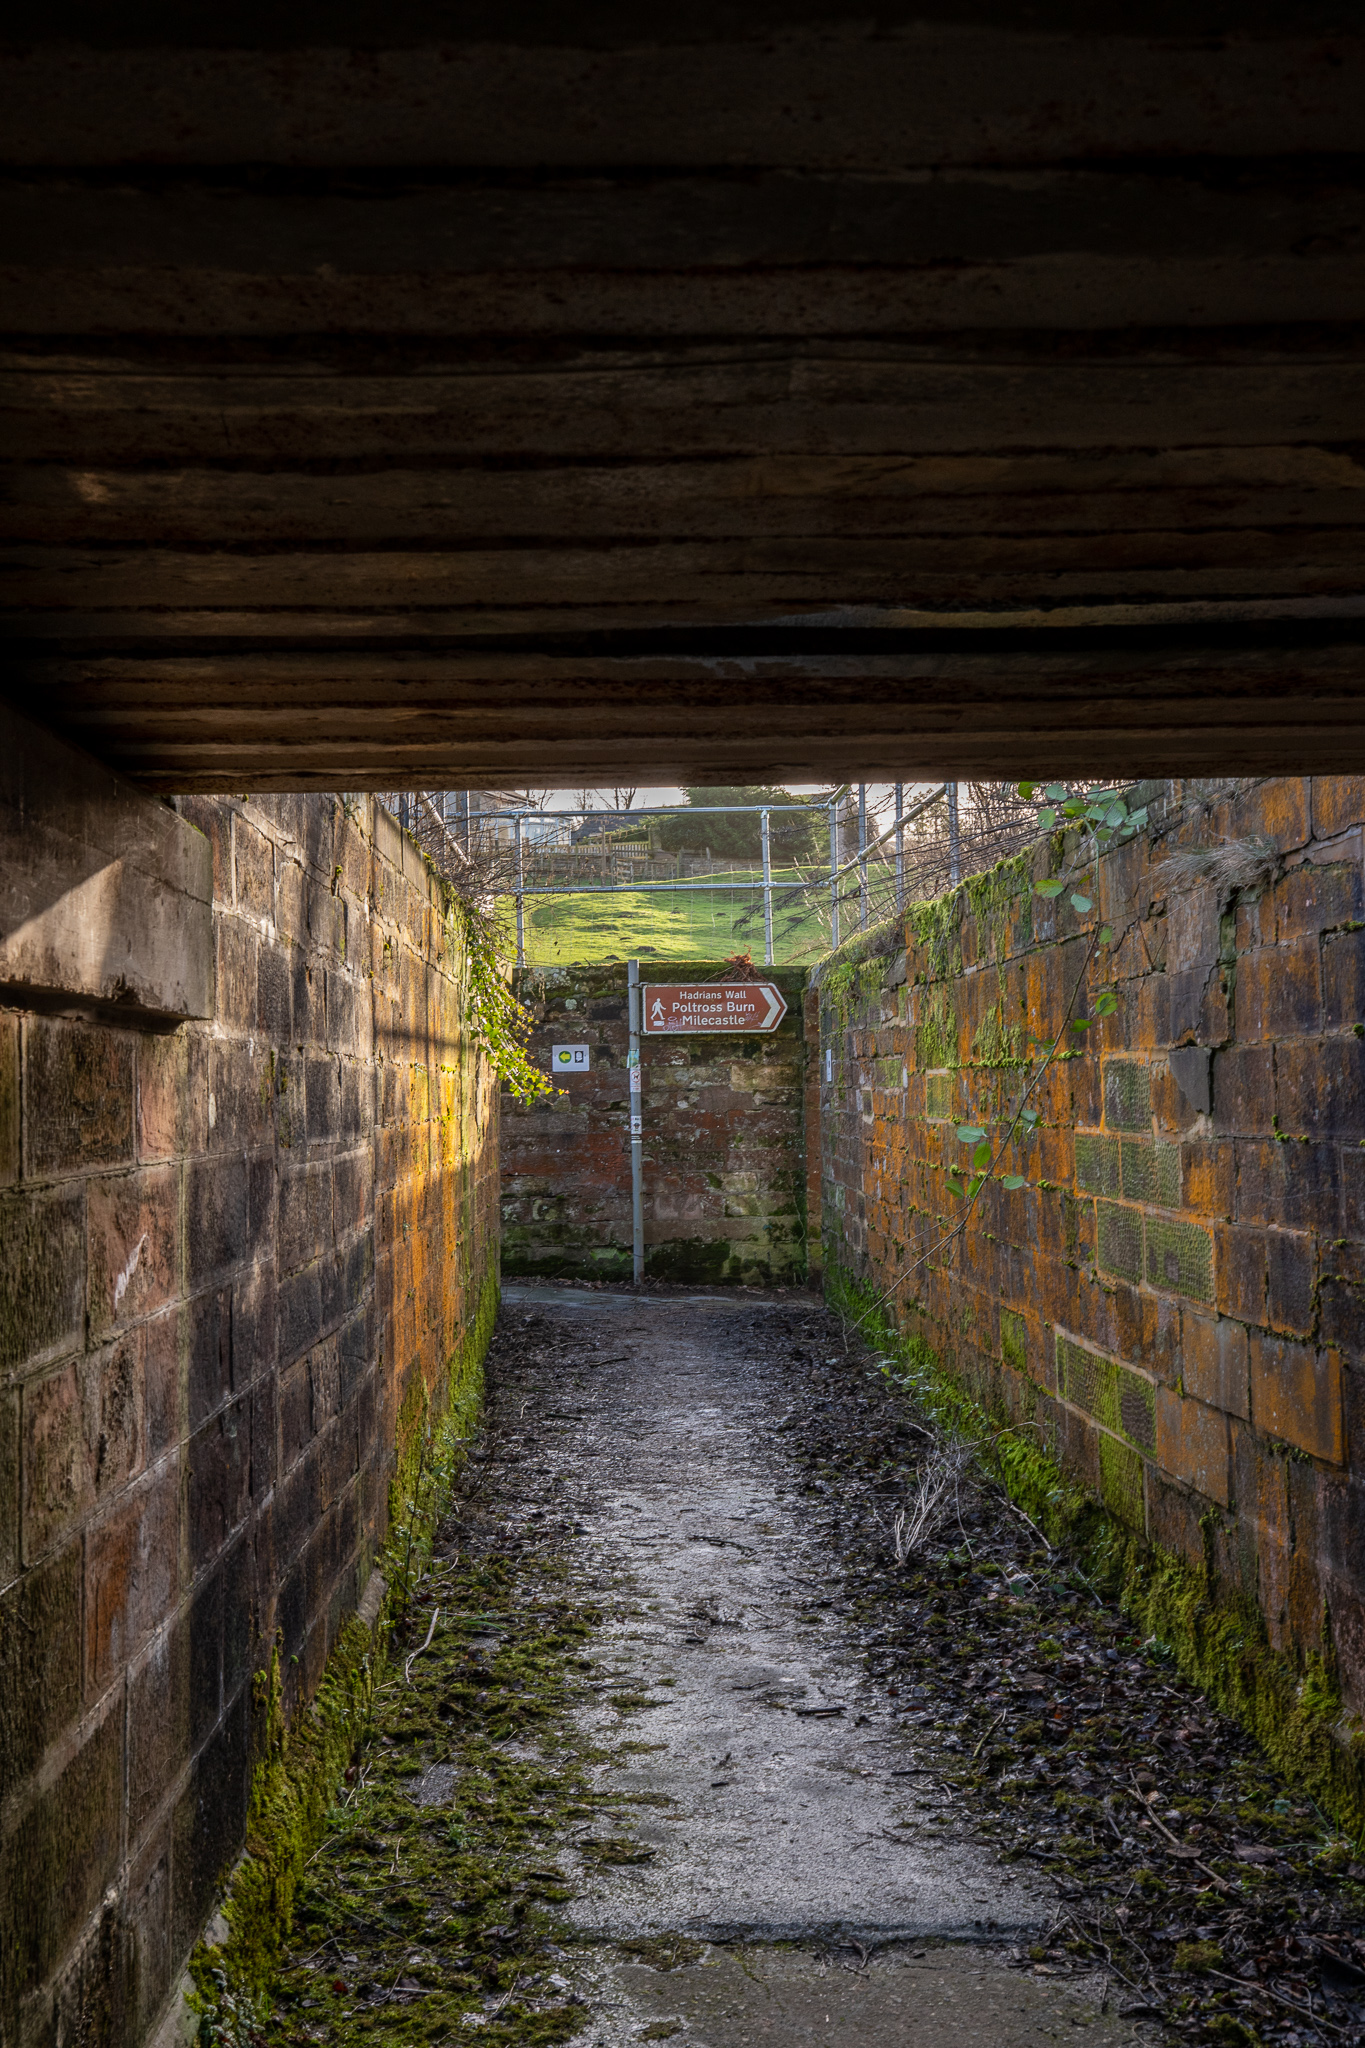 The old underpass at Gilsland leading straight to Hadrians Wall Trail